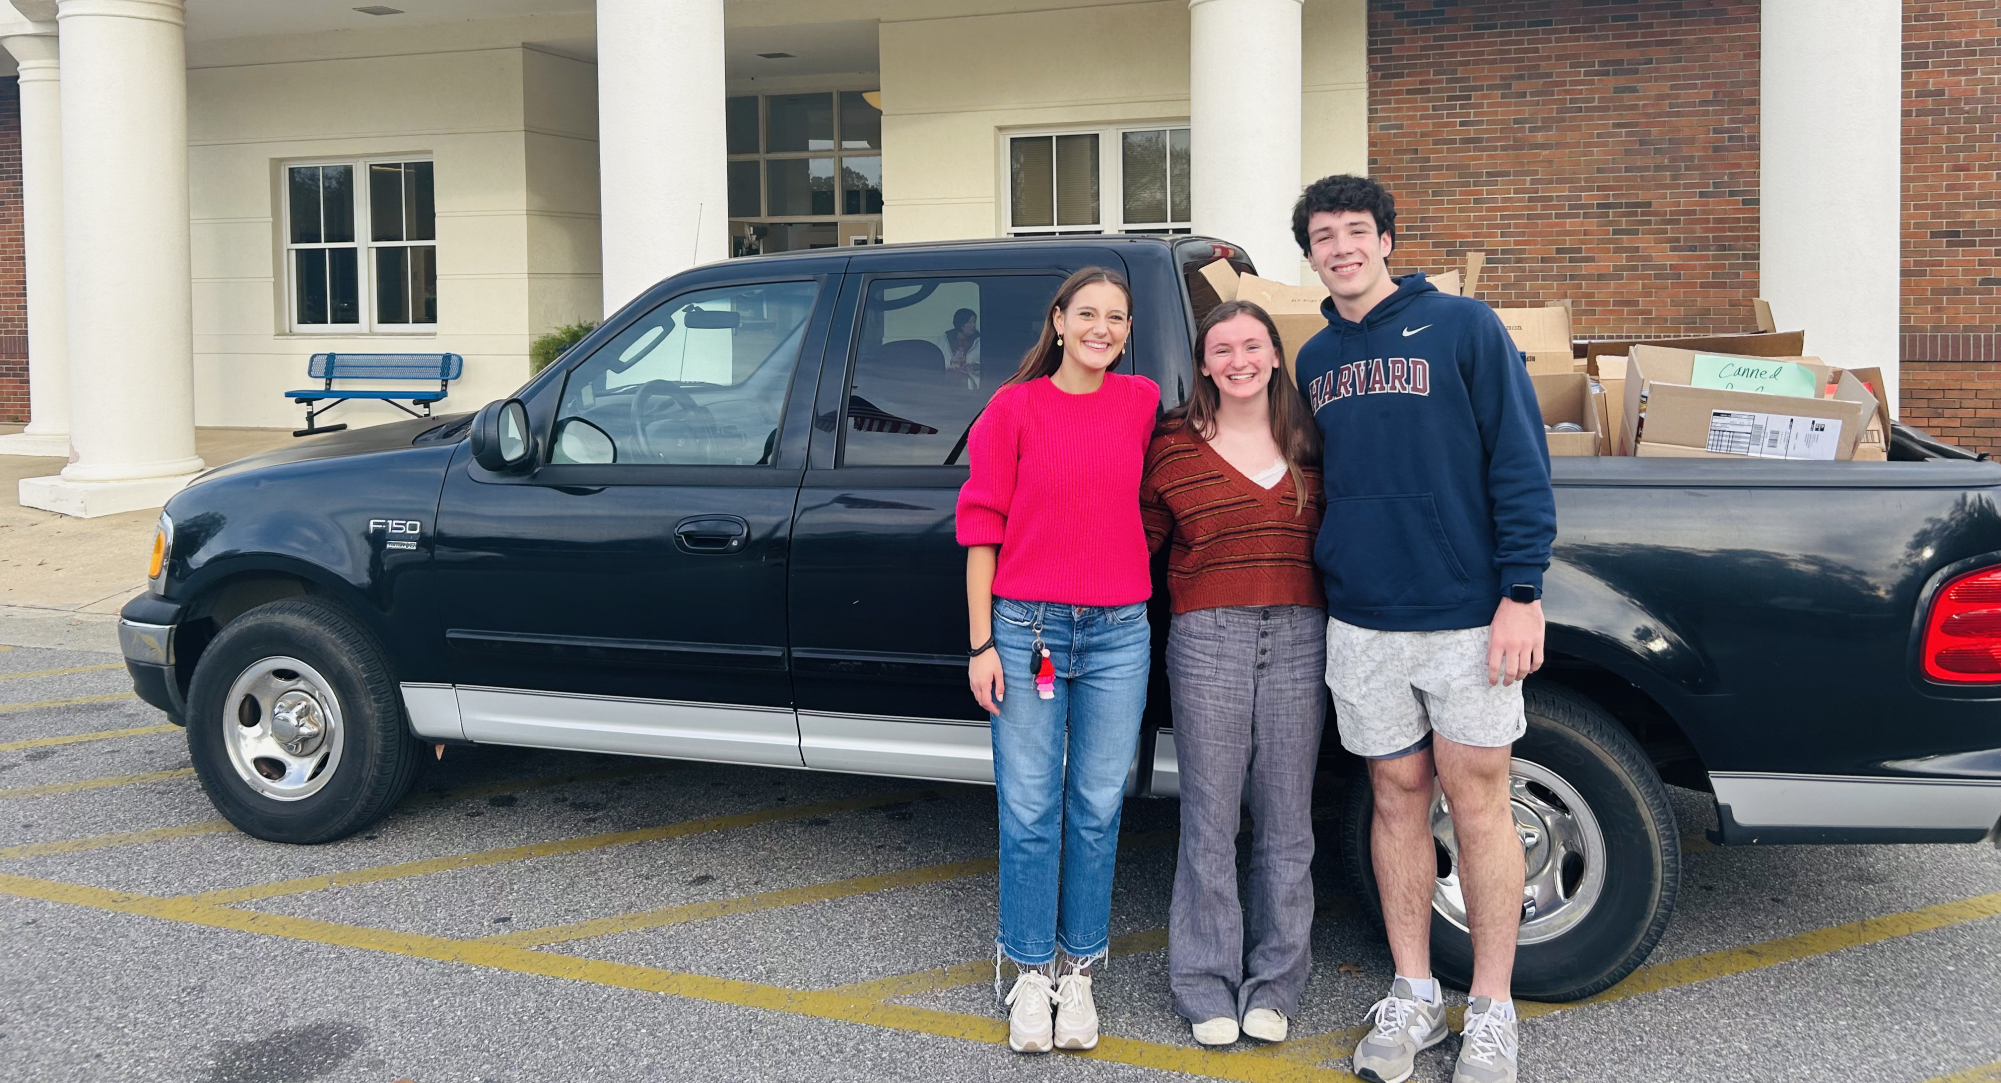 On a roll… SGA representatives Anna Bowler Conyers, A.C. Ahrendt and Sanders Daniell prepare to deliver cans to Prodisee Pantry. Seniors spent all morning collecting cans.